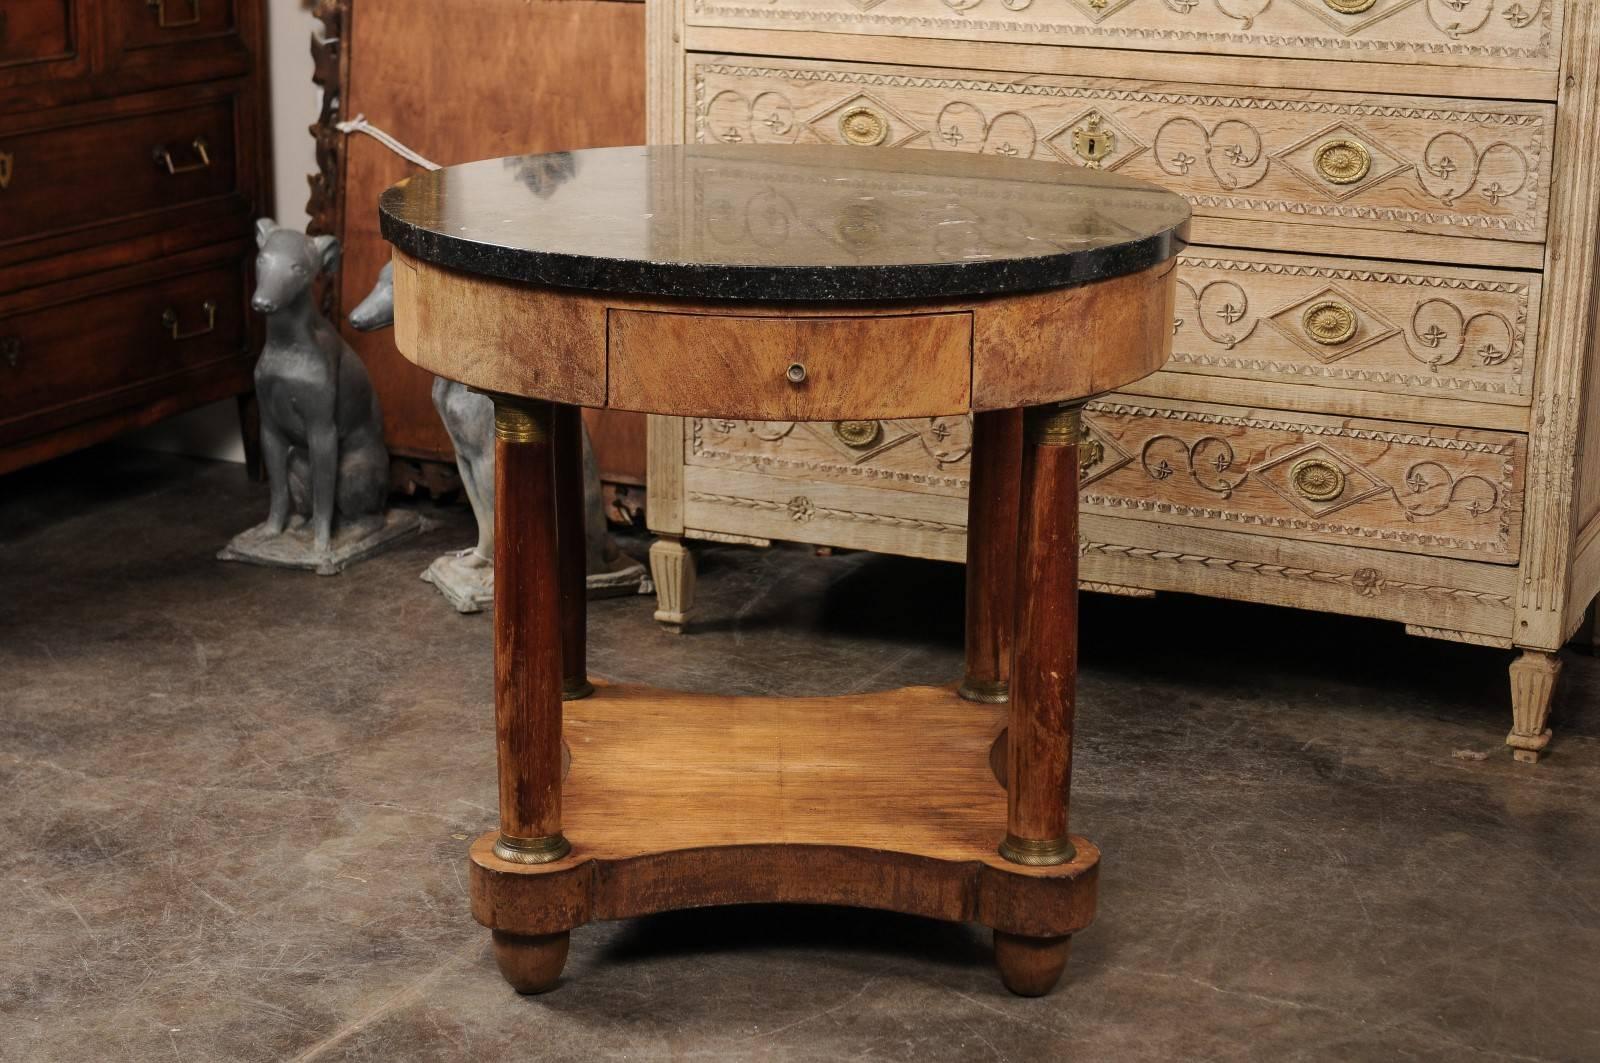 This French Empire style side table from the mid-19th century features a circular black marble top sitting over a beautifully burl veneered apron with two hand-cut, dovetailed drawers and two pull-outs fitted with leather. The table is supported by